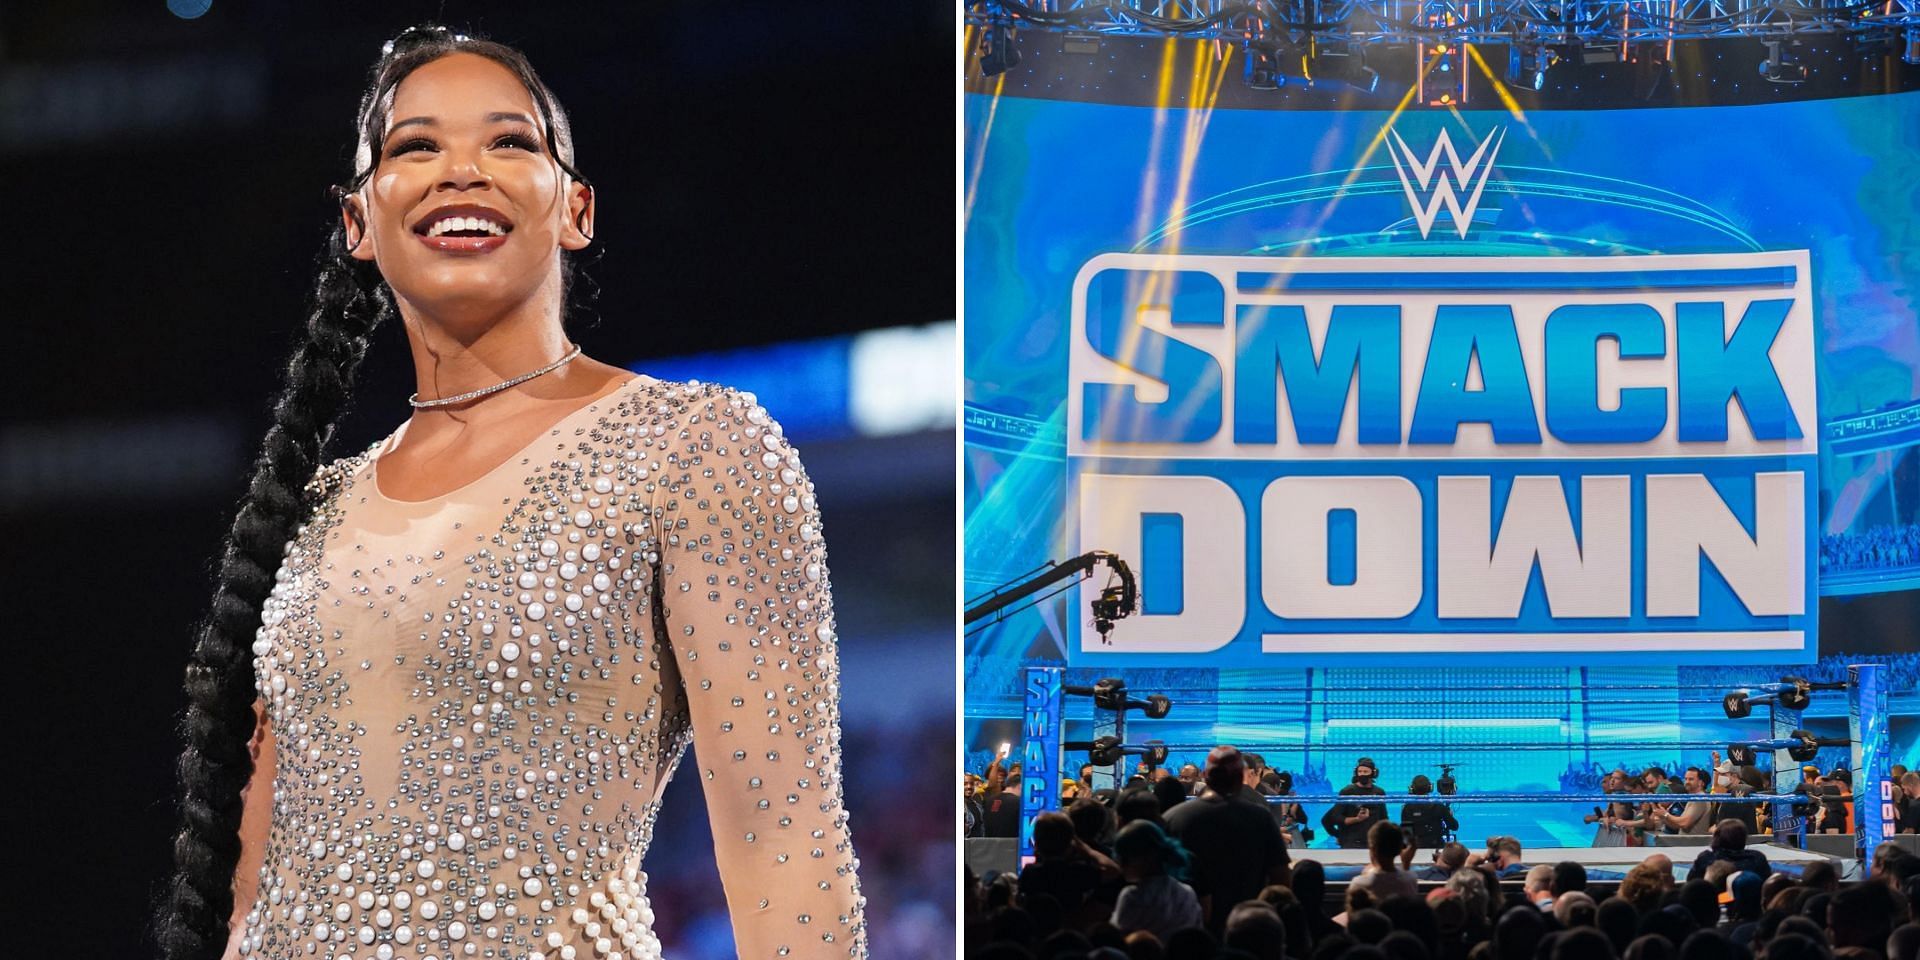 Bianca Belair returned to WWE on SmackDown